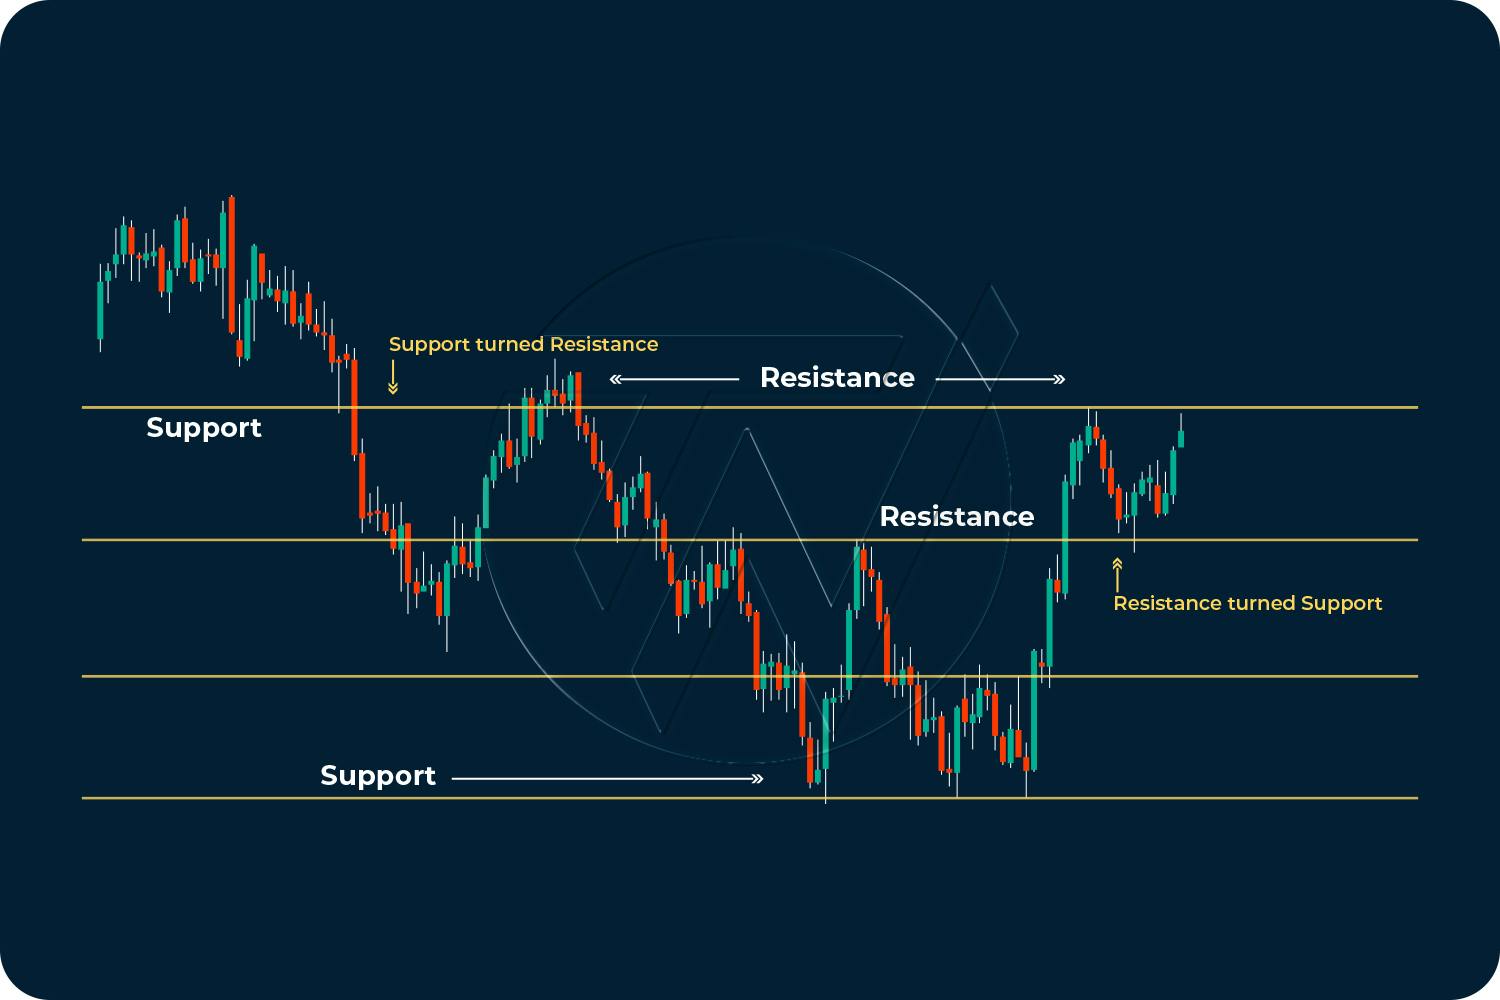 Candlestick chart patterns illustrating support and resistance lines